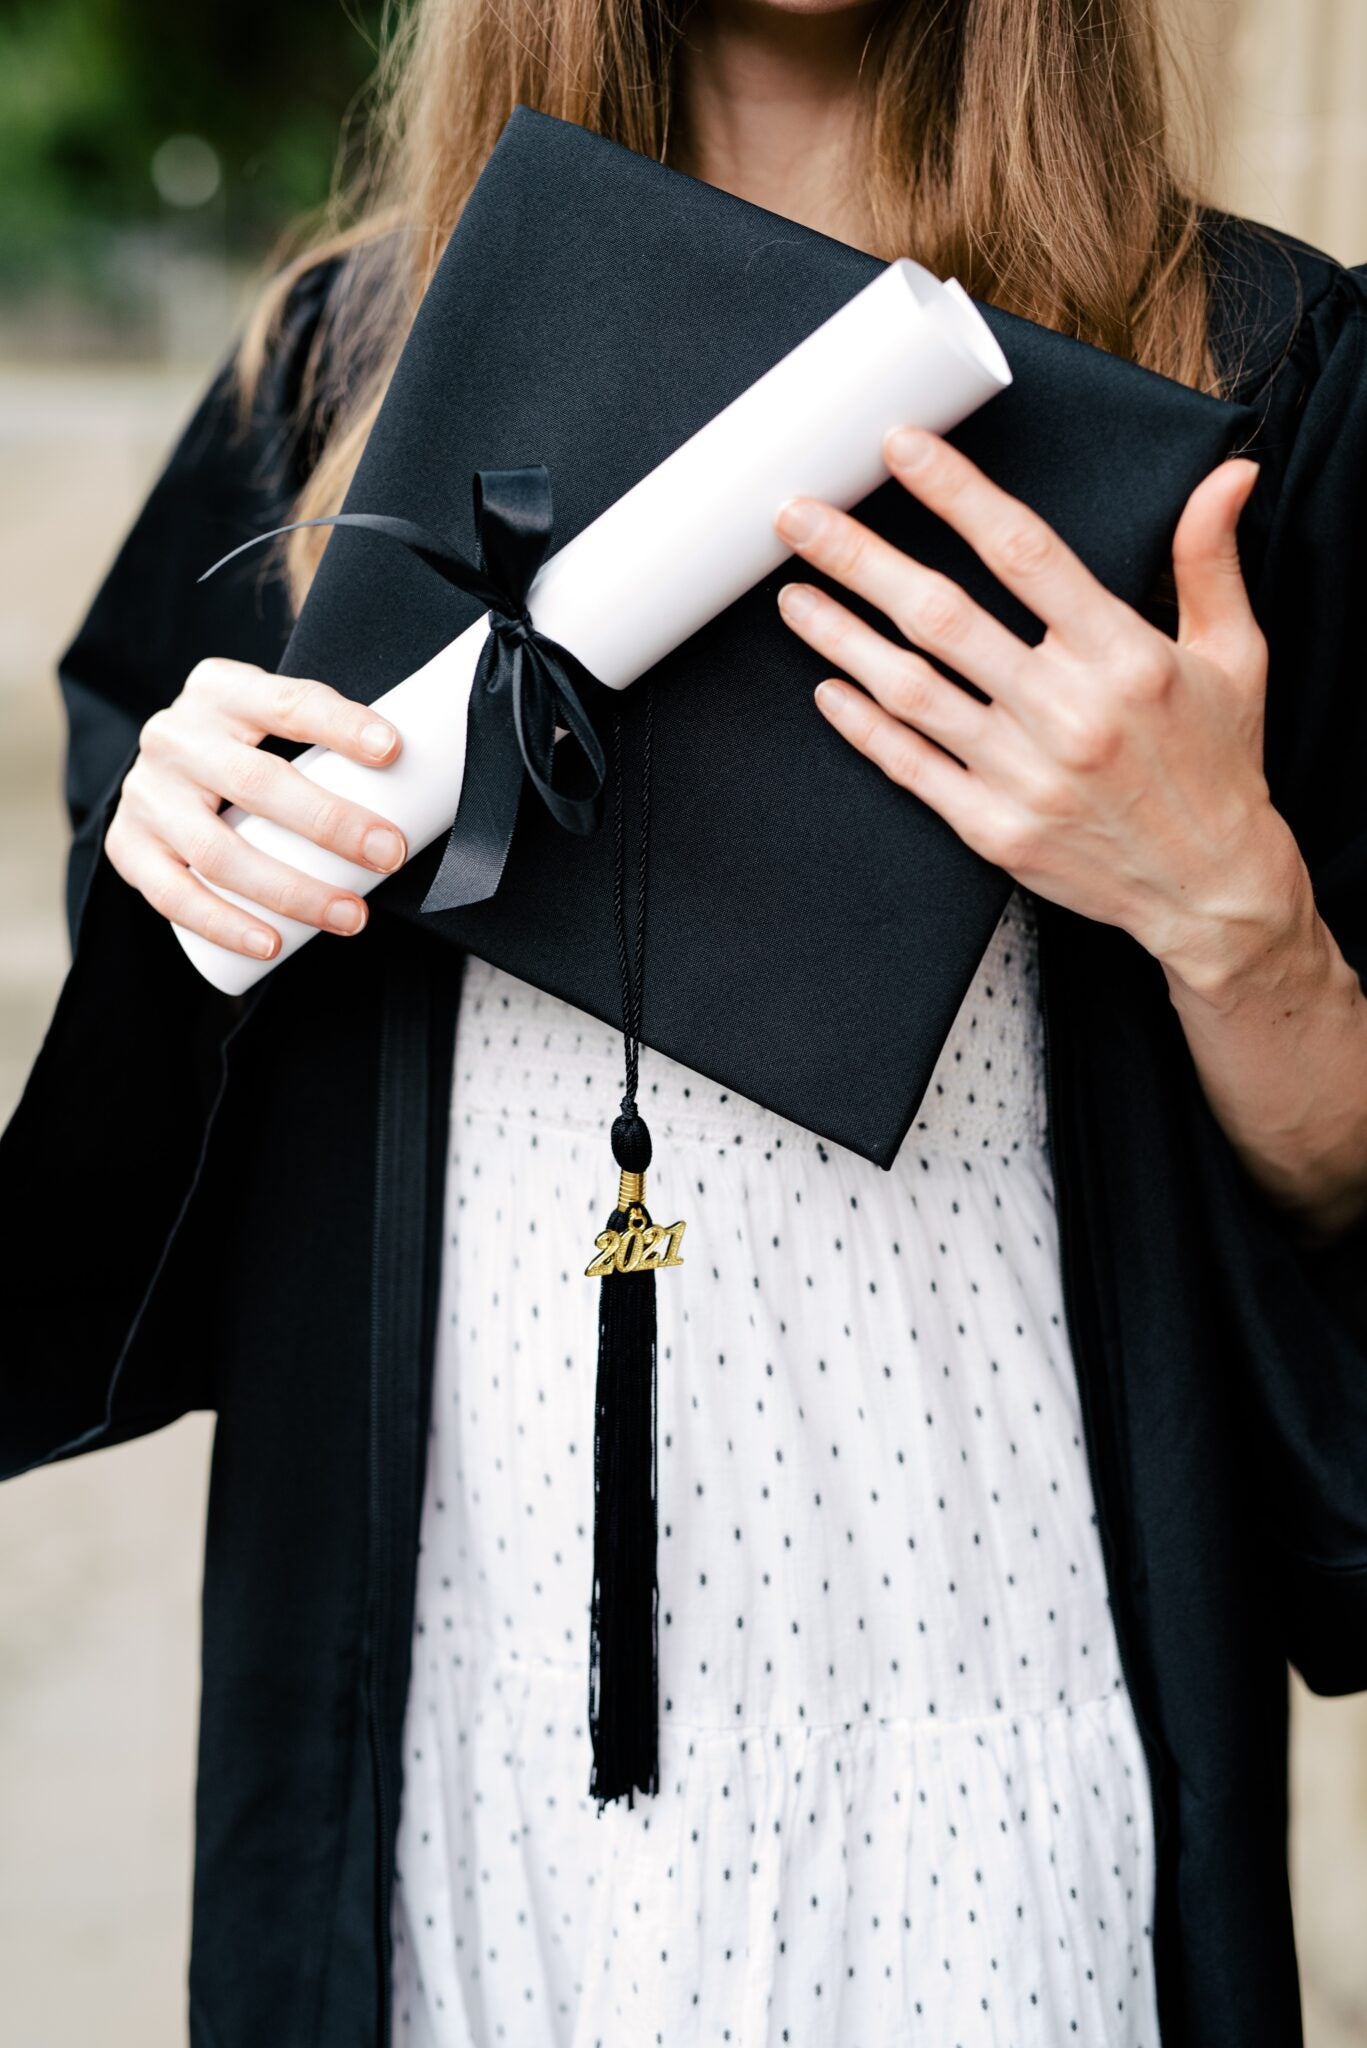 What To Do After Graduation: A Guide For Landing A Job